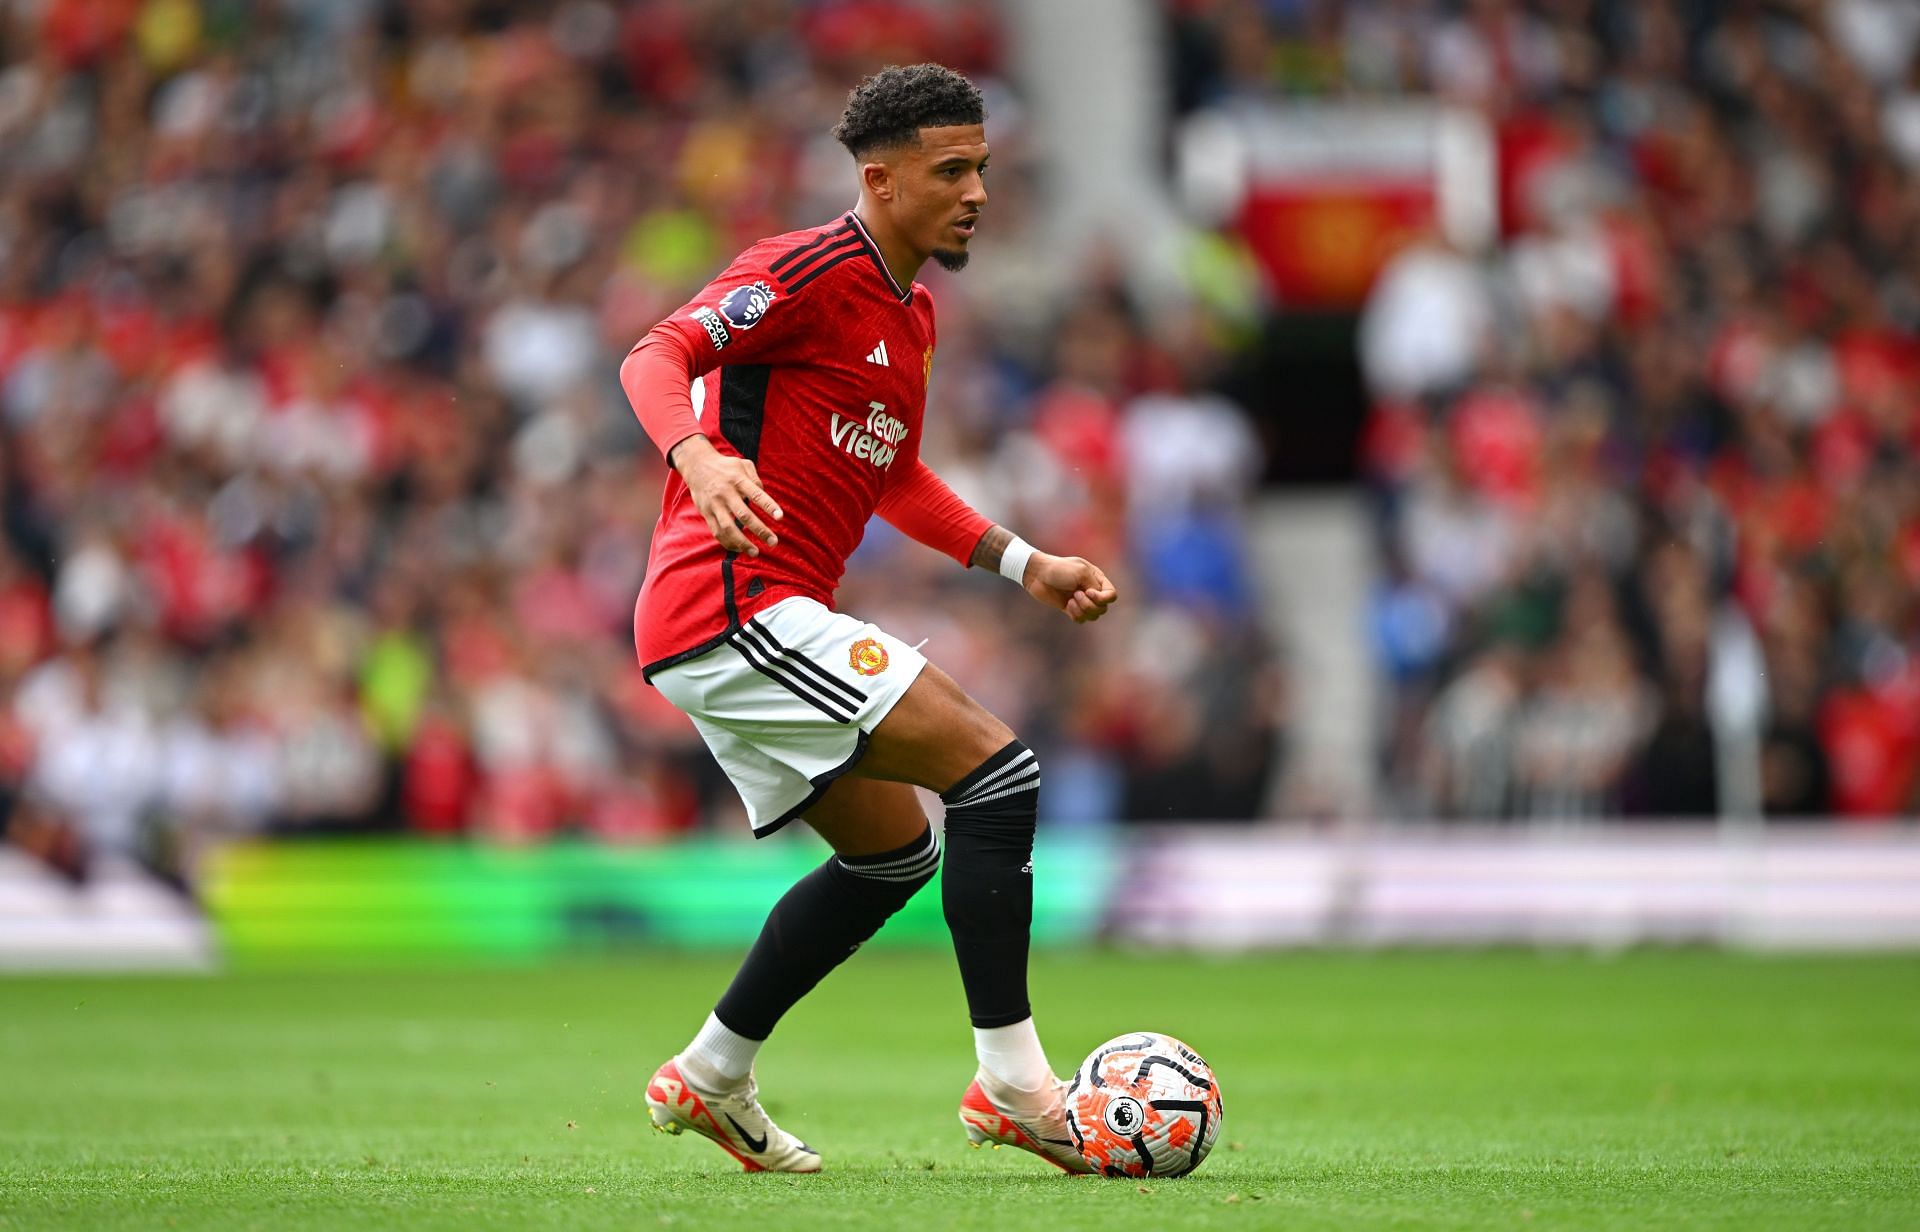 Jadon Sancho is playing with fire at Old Trafford